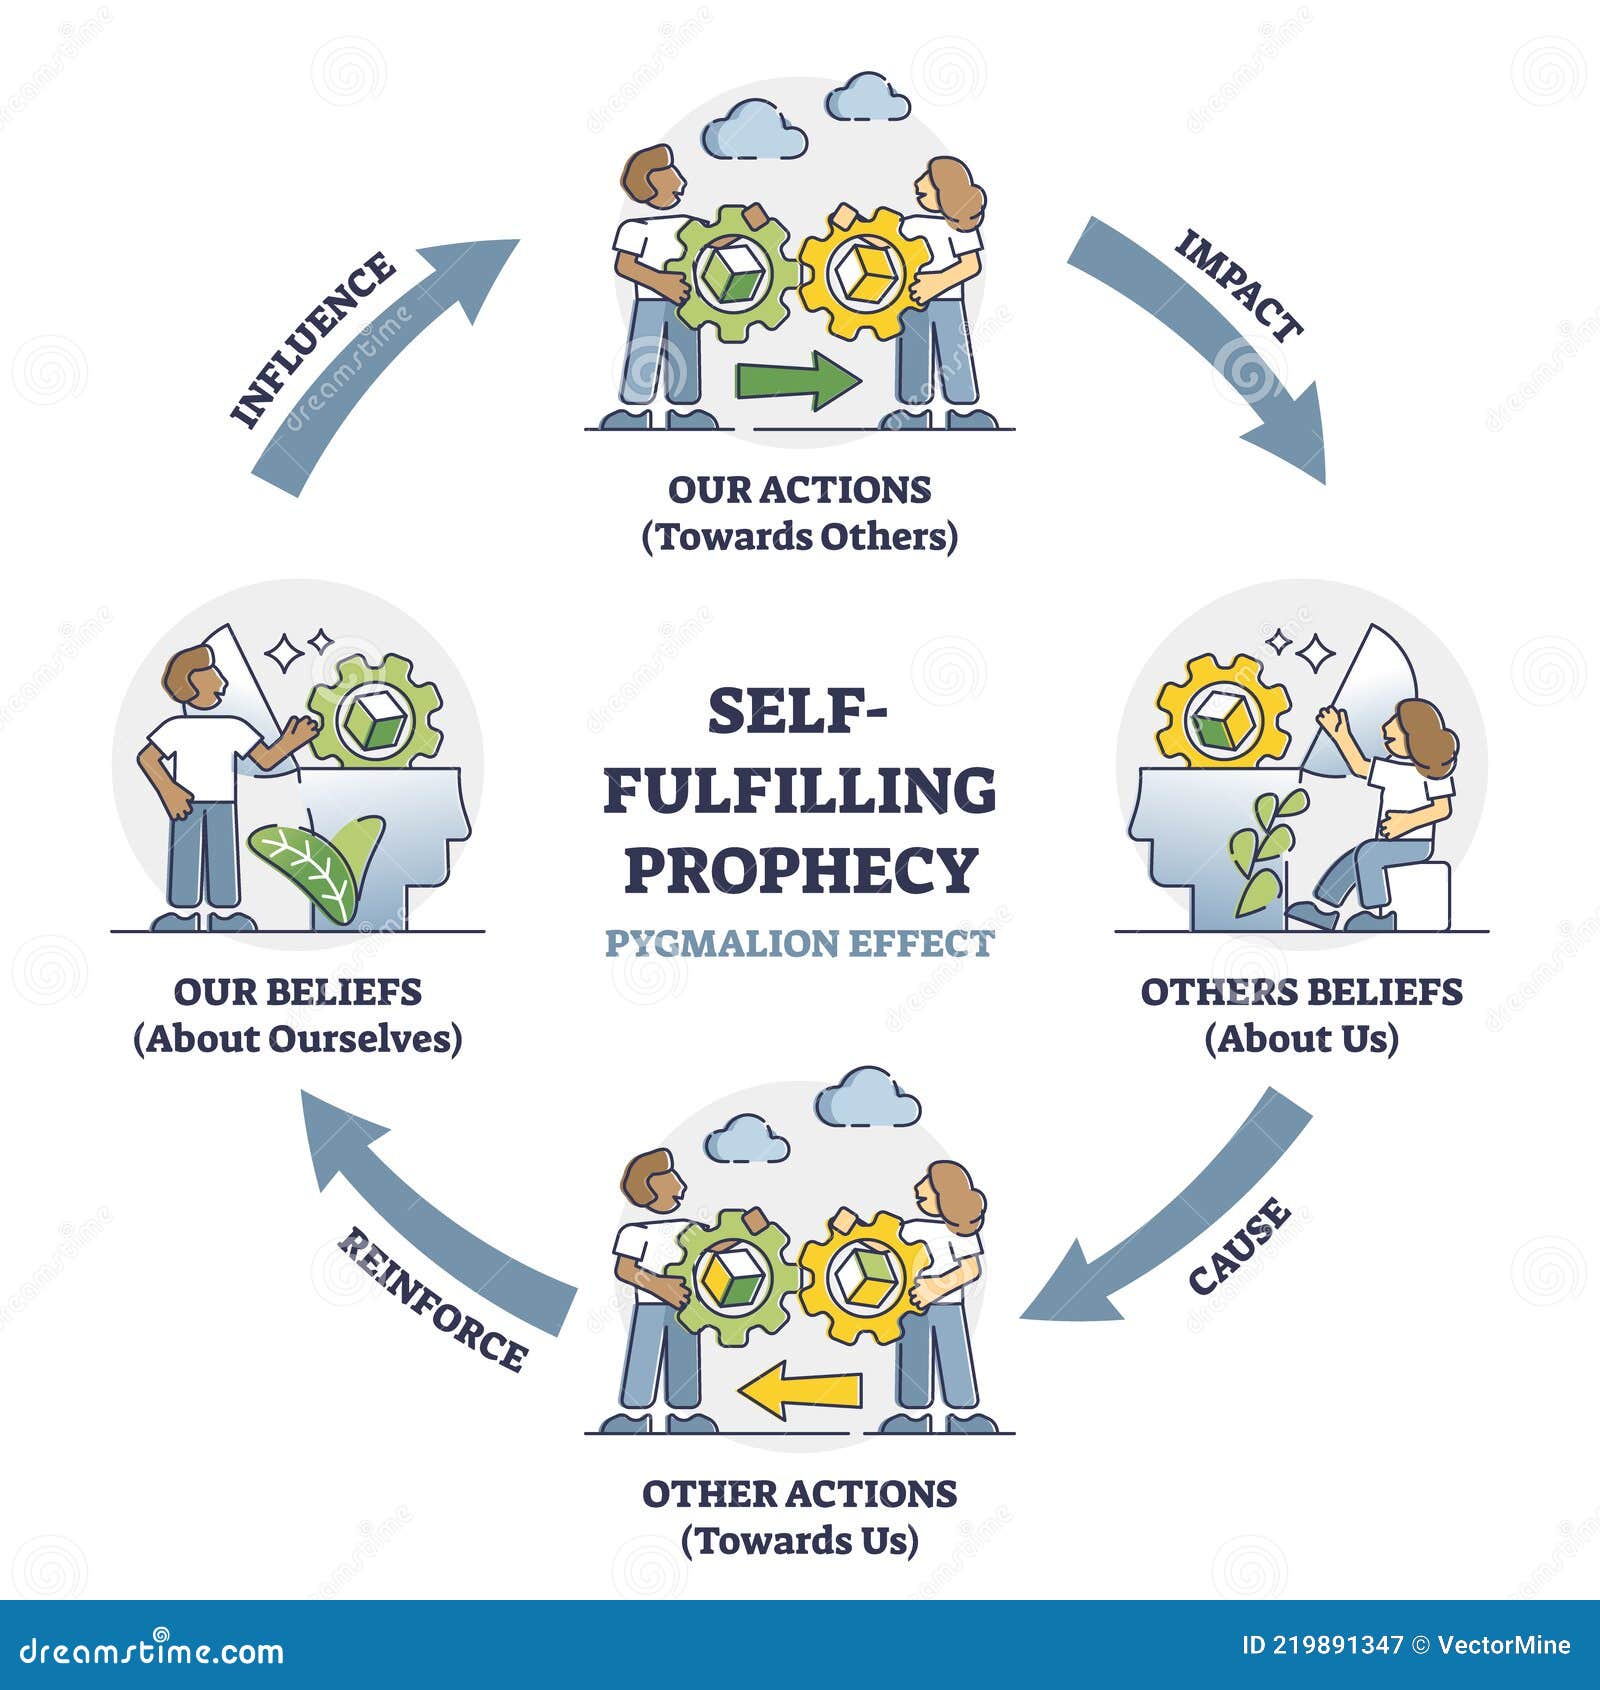 self fulfilling prophecy and pygmalion effect educational outline diagram